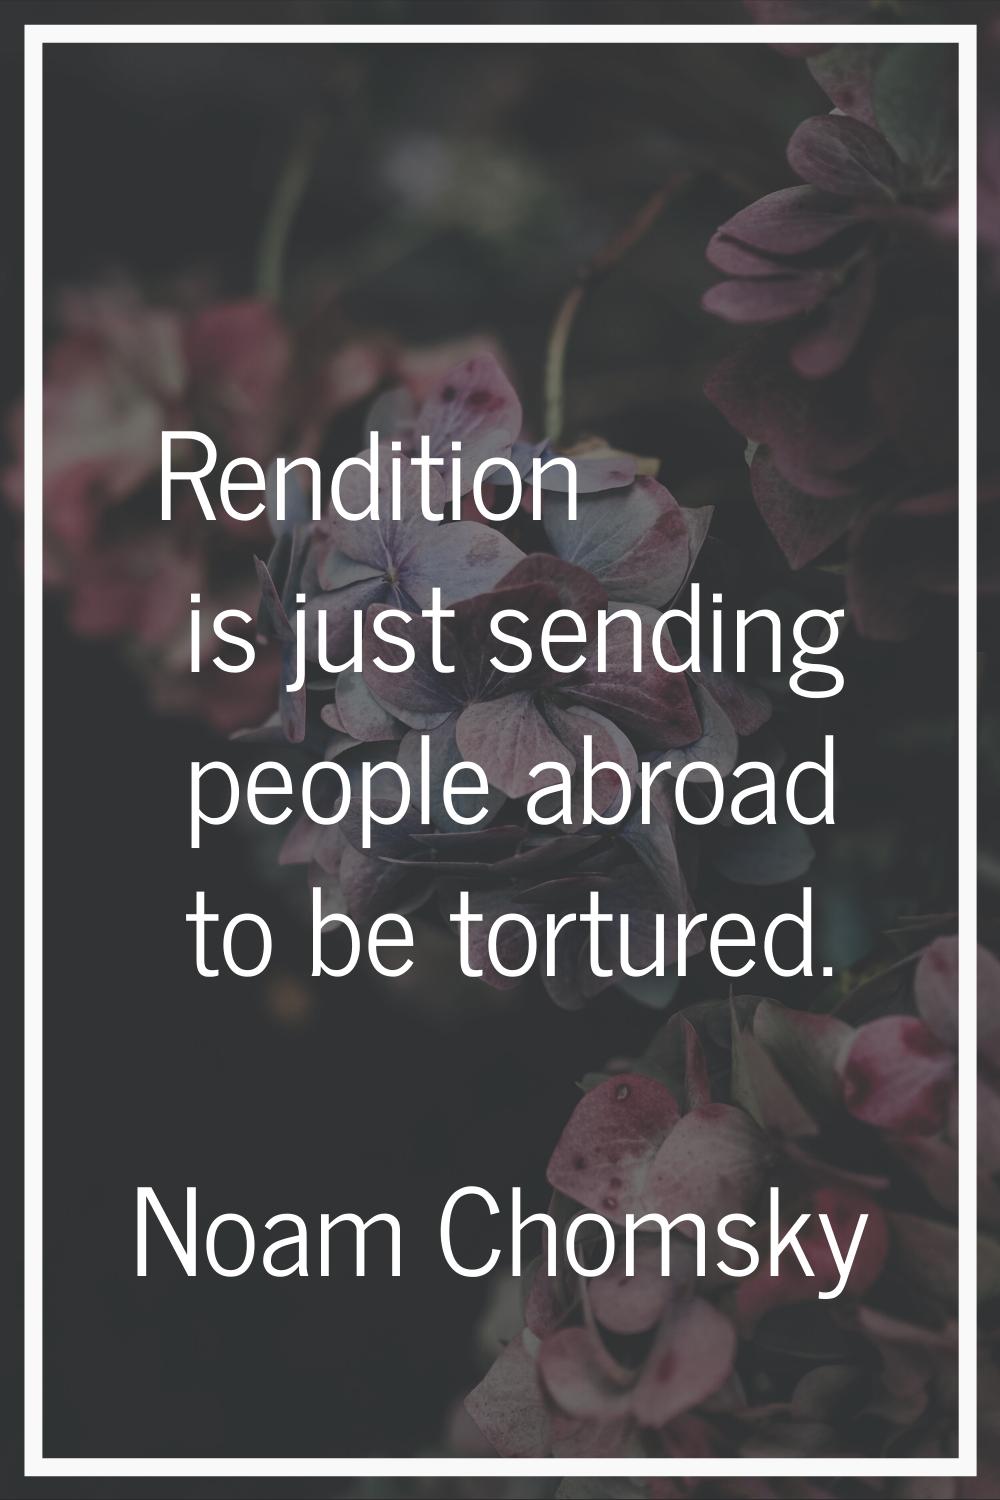 Rendition is just sending people abroad to be tortured.